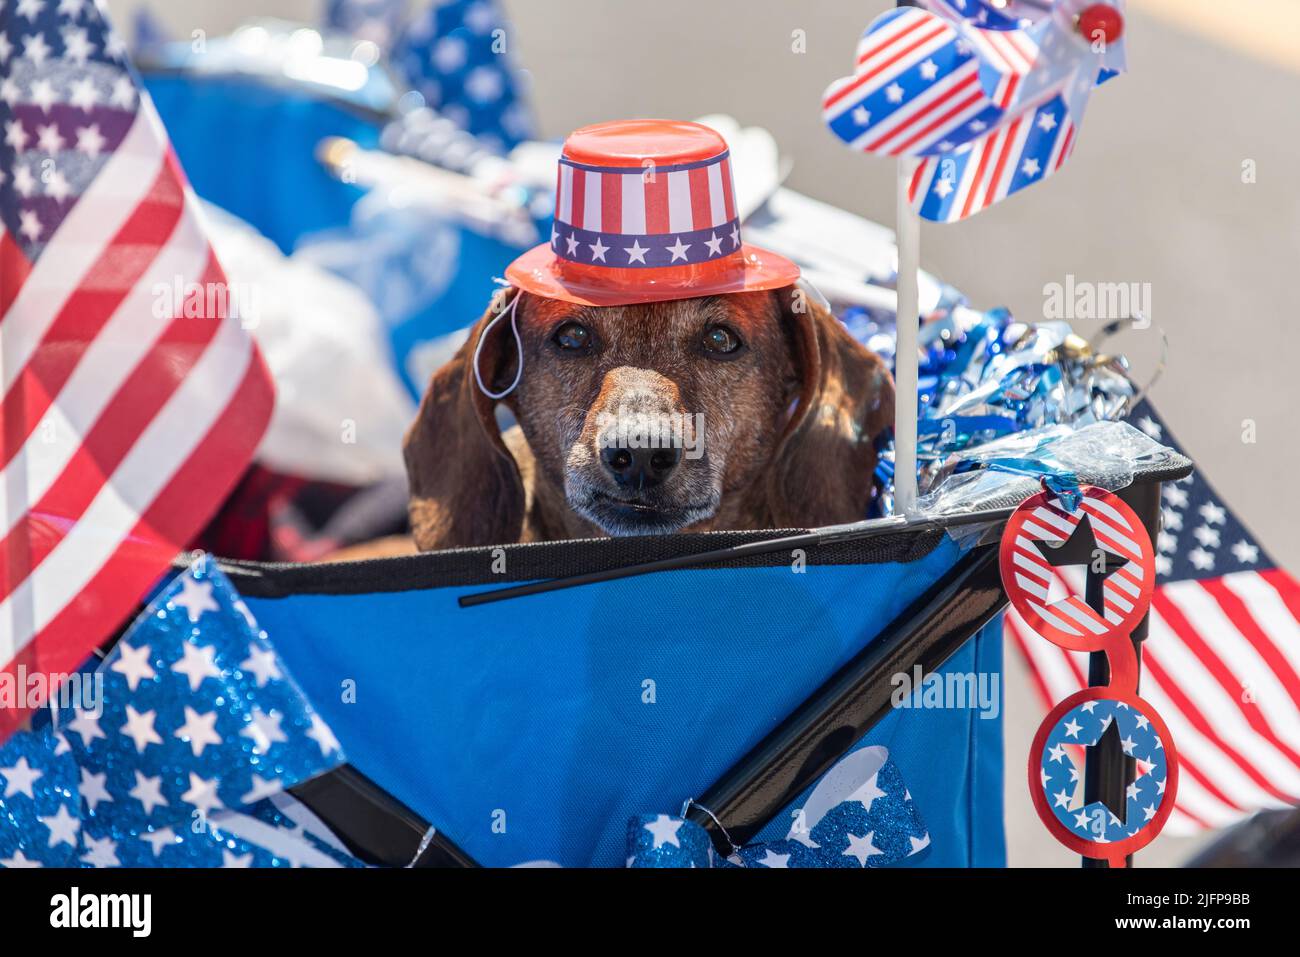 Forth of July holiday parade in small town is perfect place to walk the dachshund dog in the stars and stripes top hat. Stock Photo